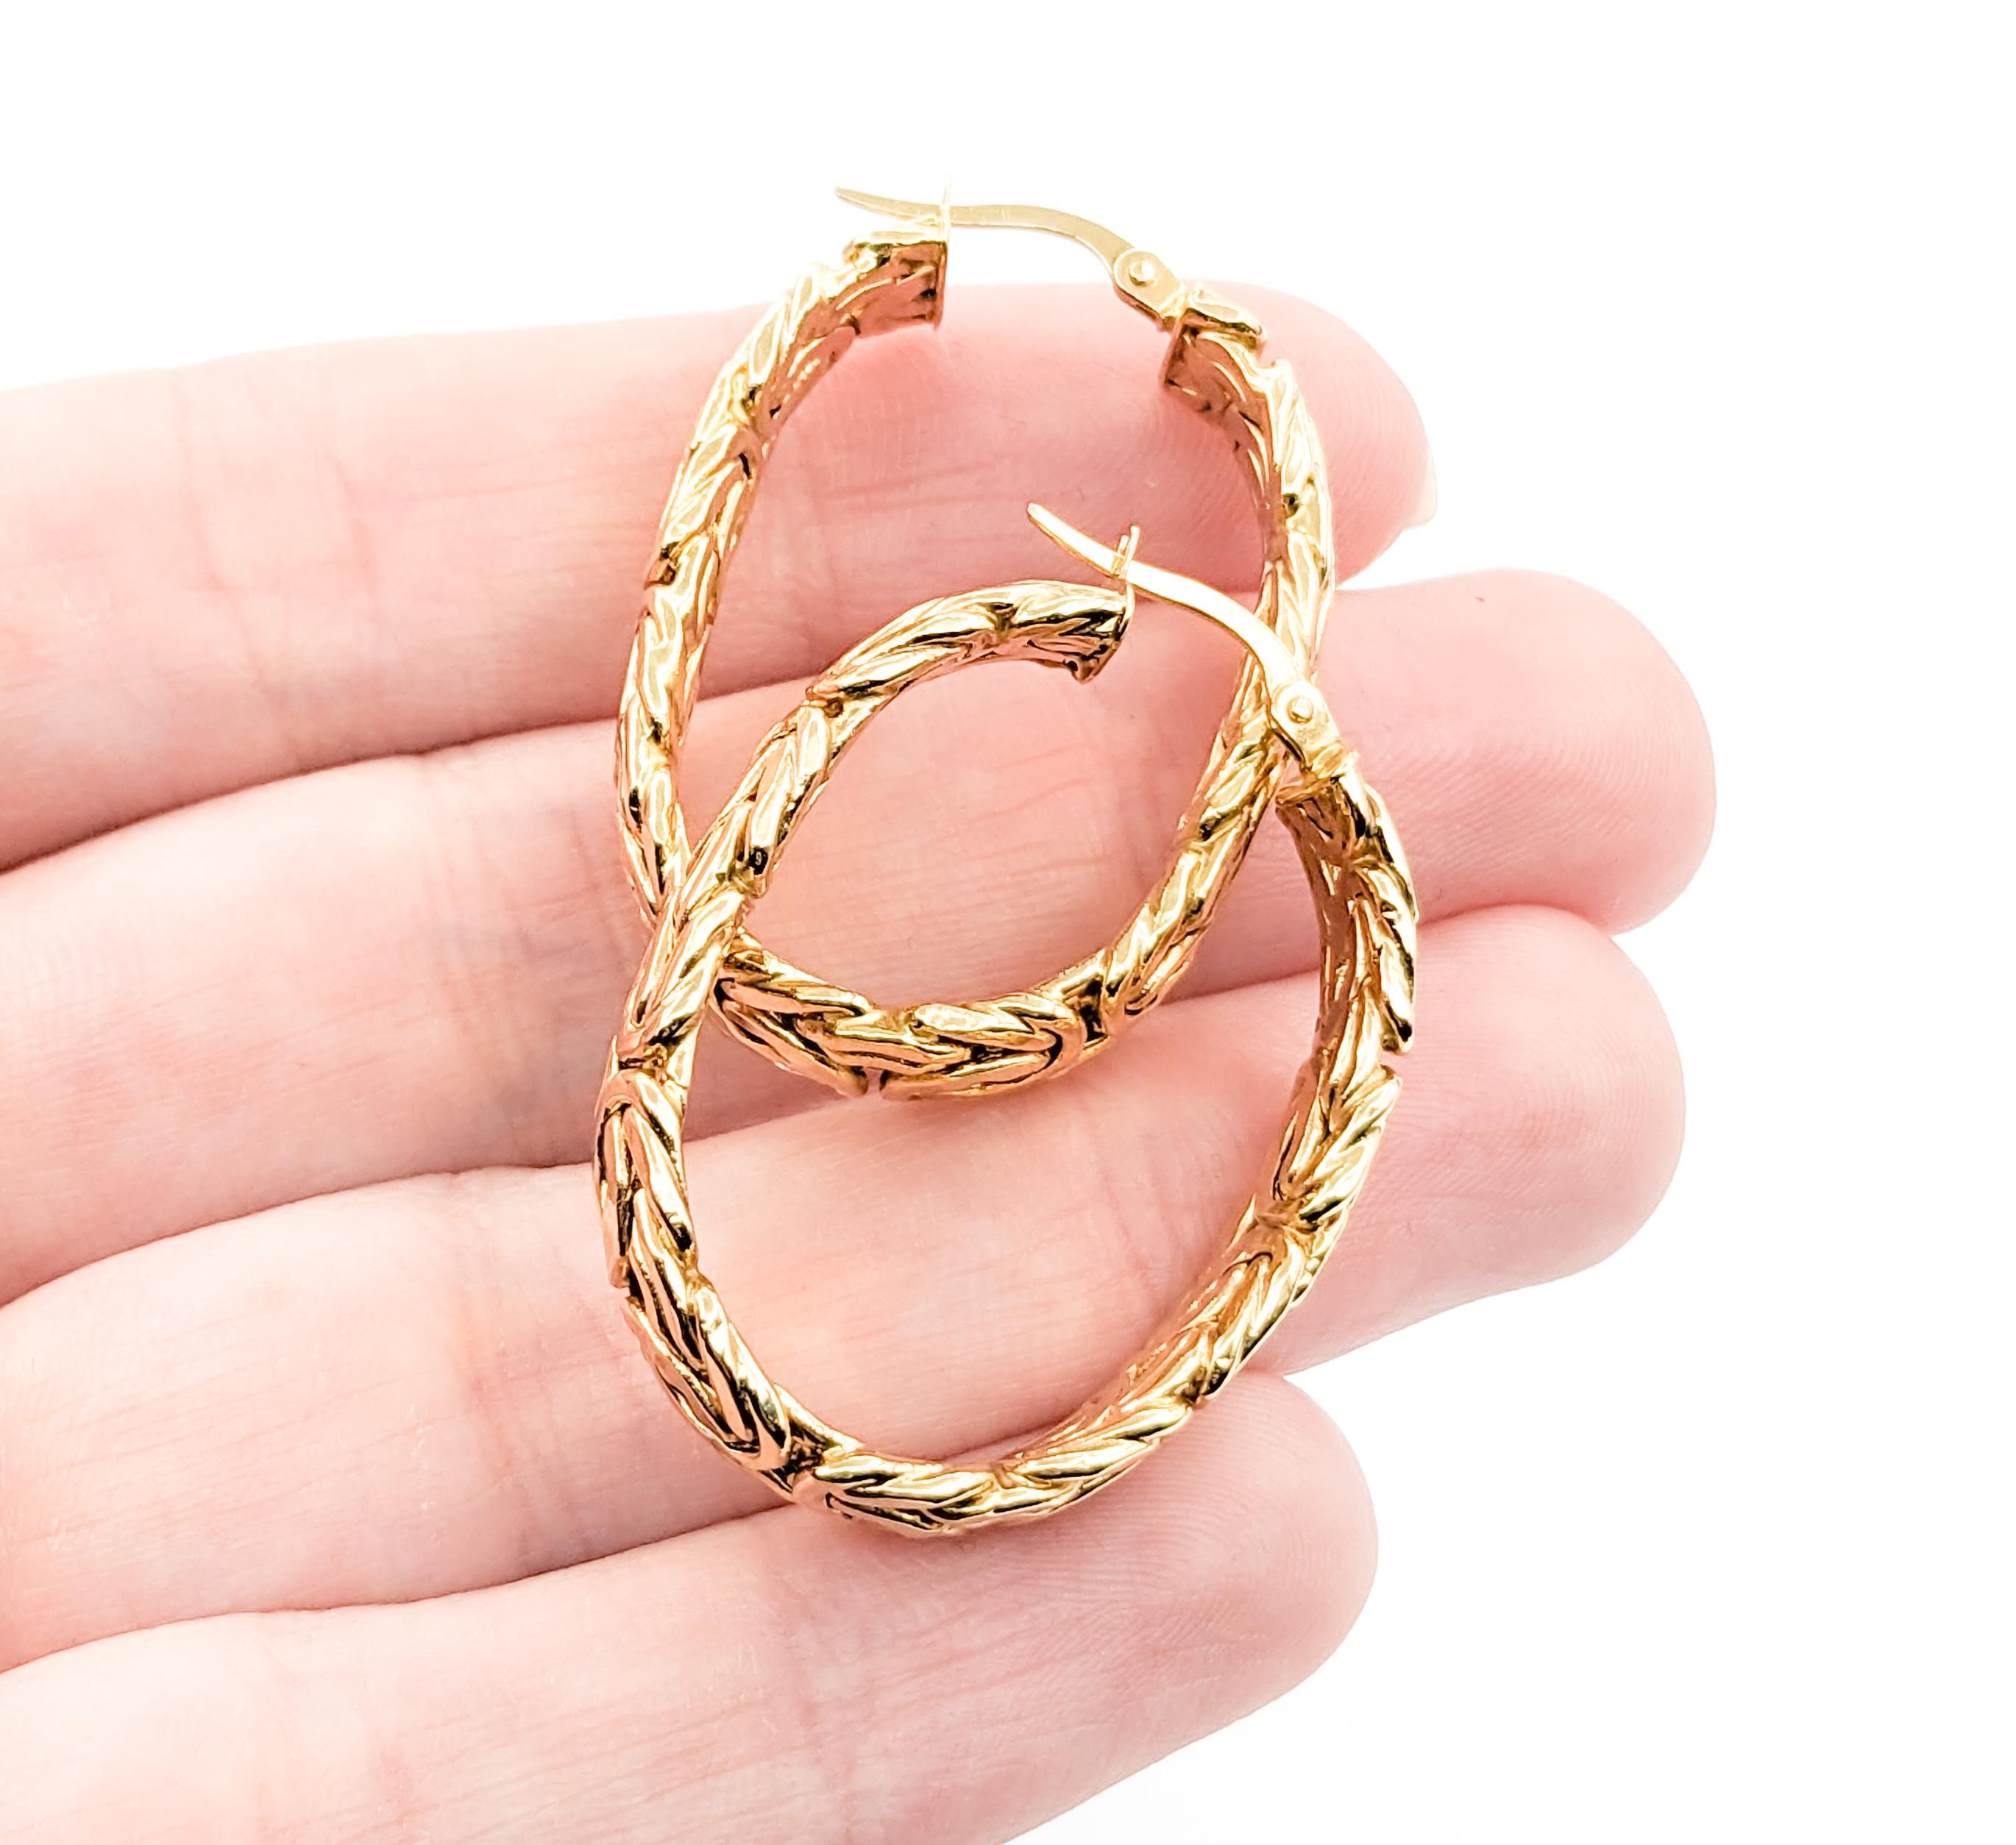 Flat Byzantine Hoop Earrings In Yellow Gold In Excellent Condition For Sale In Bloomington, MN